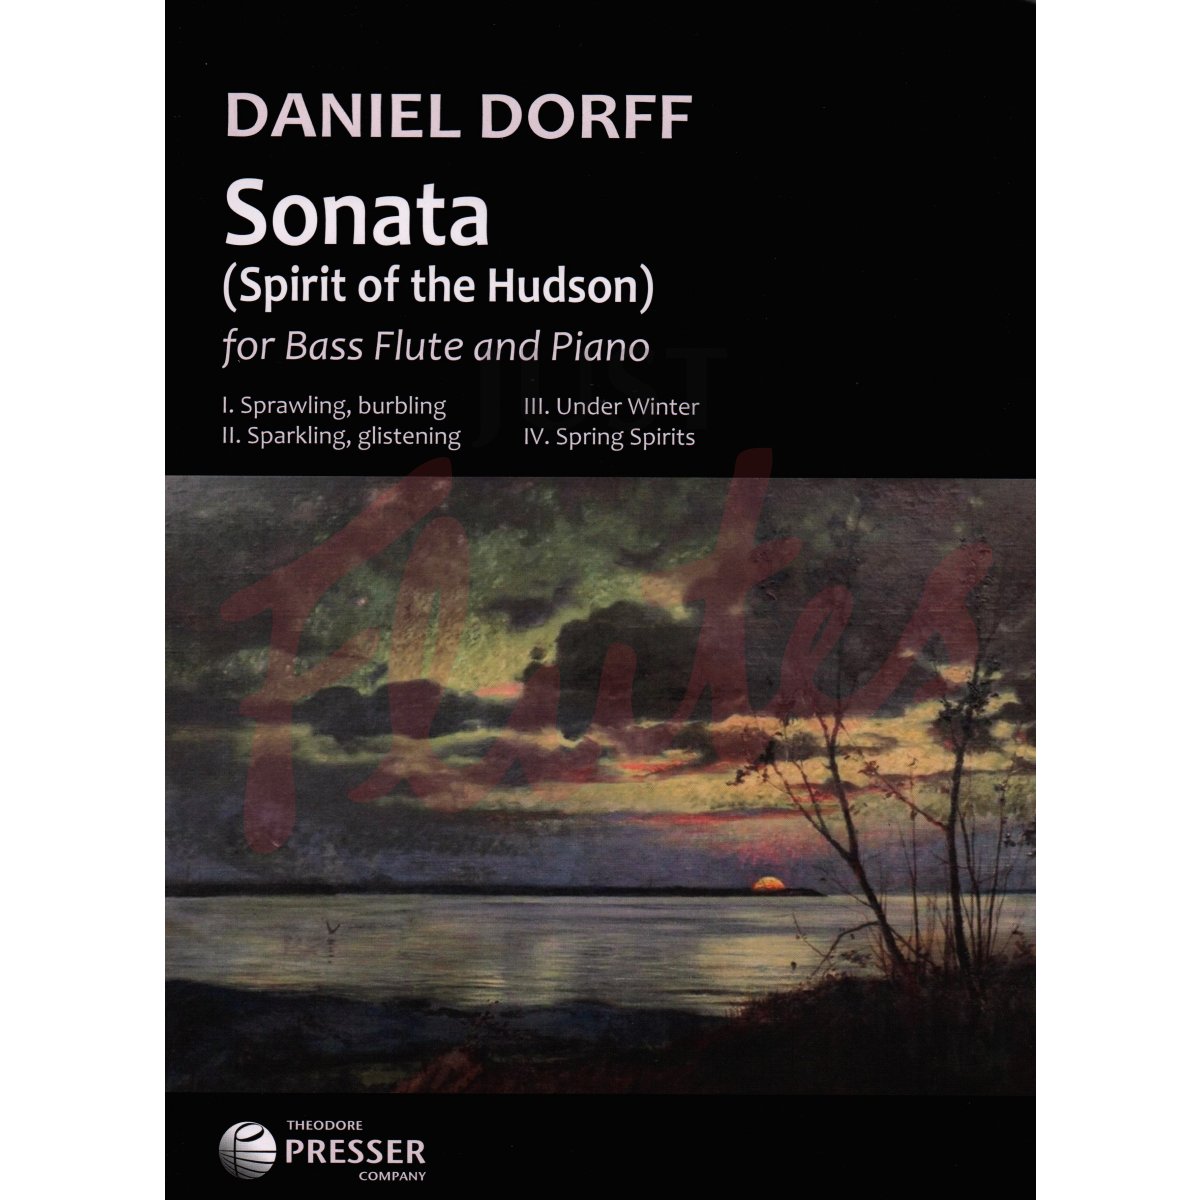 Sonata (Spirit of the Hudson) for Bass Flute and Piano